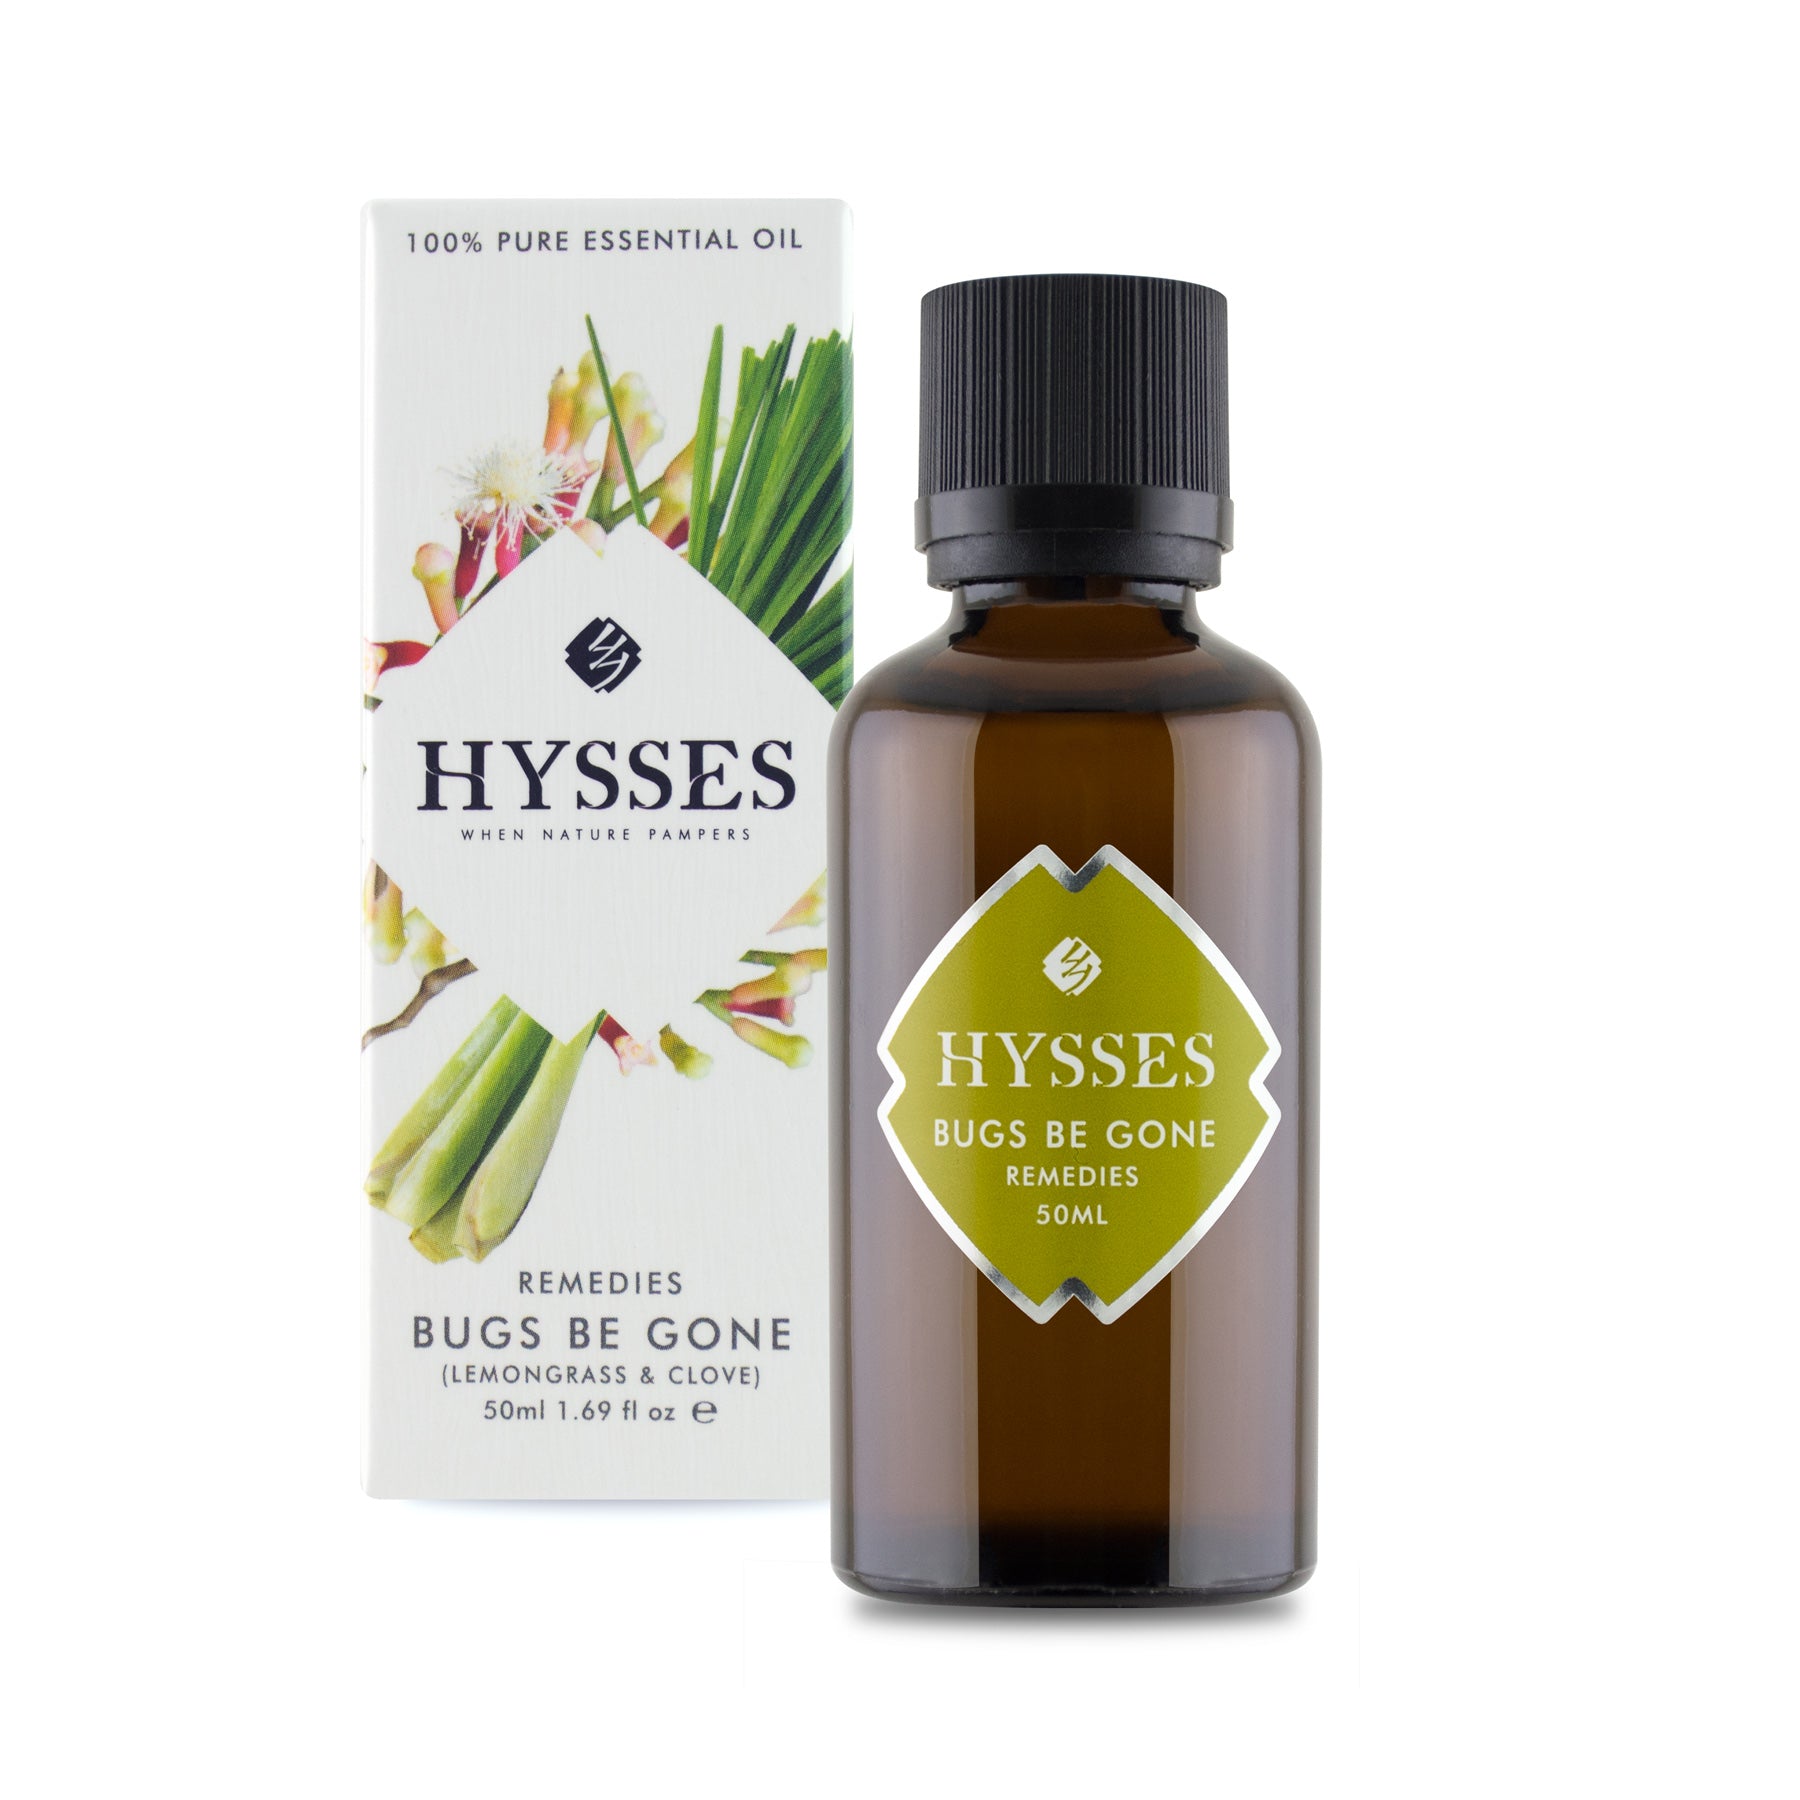 Remedies, Bugs Be Gone - HYSSES